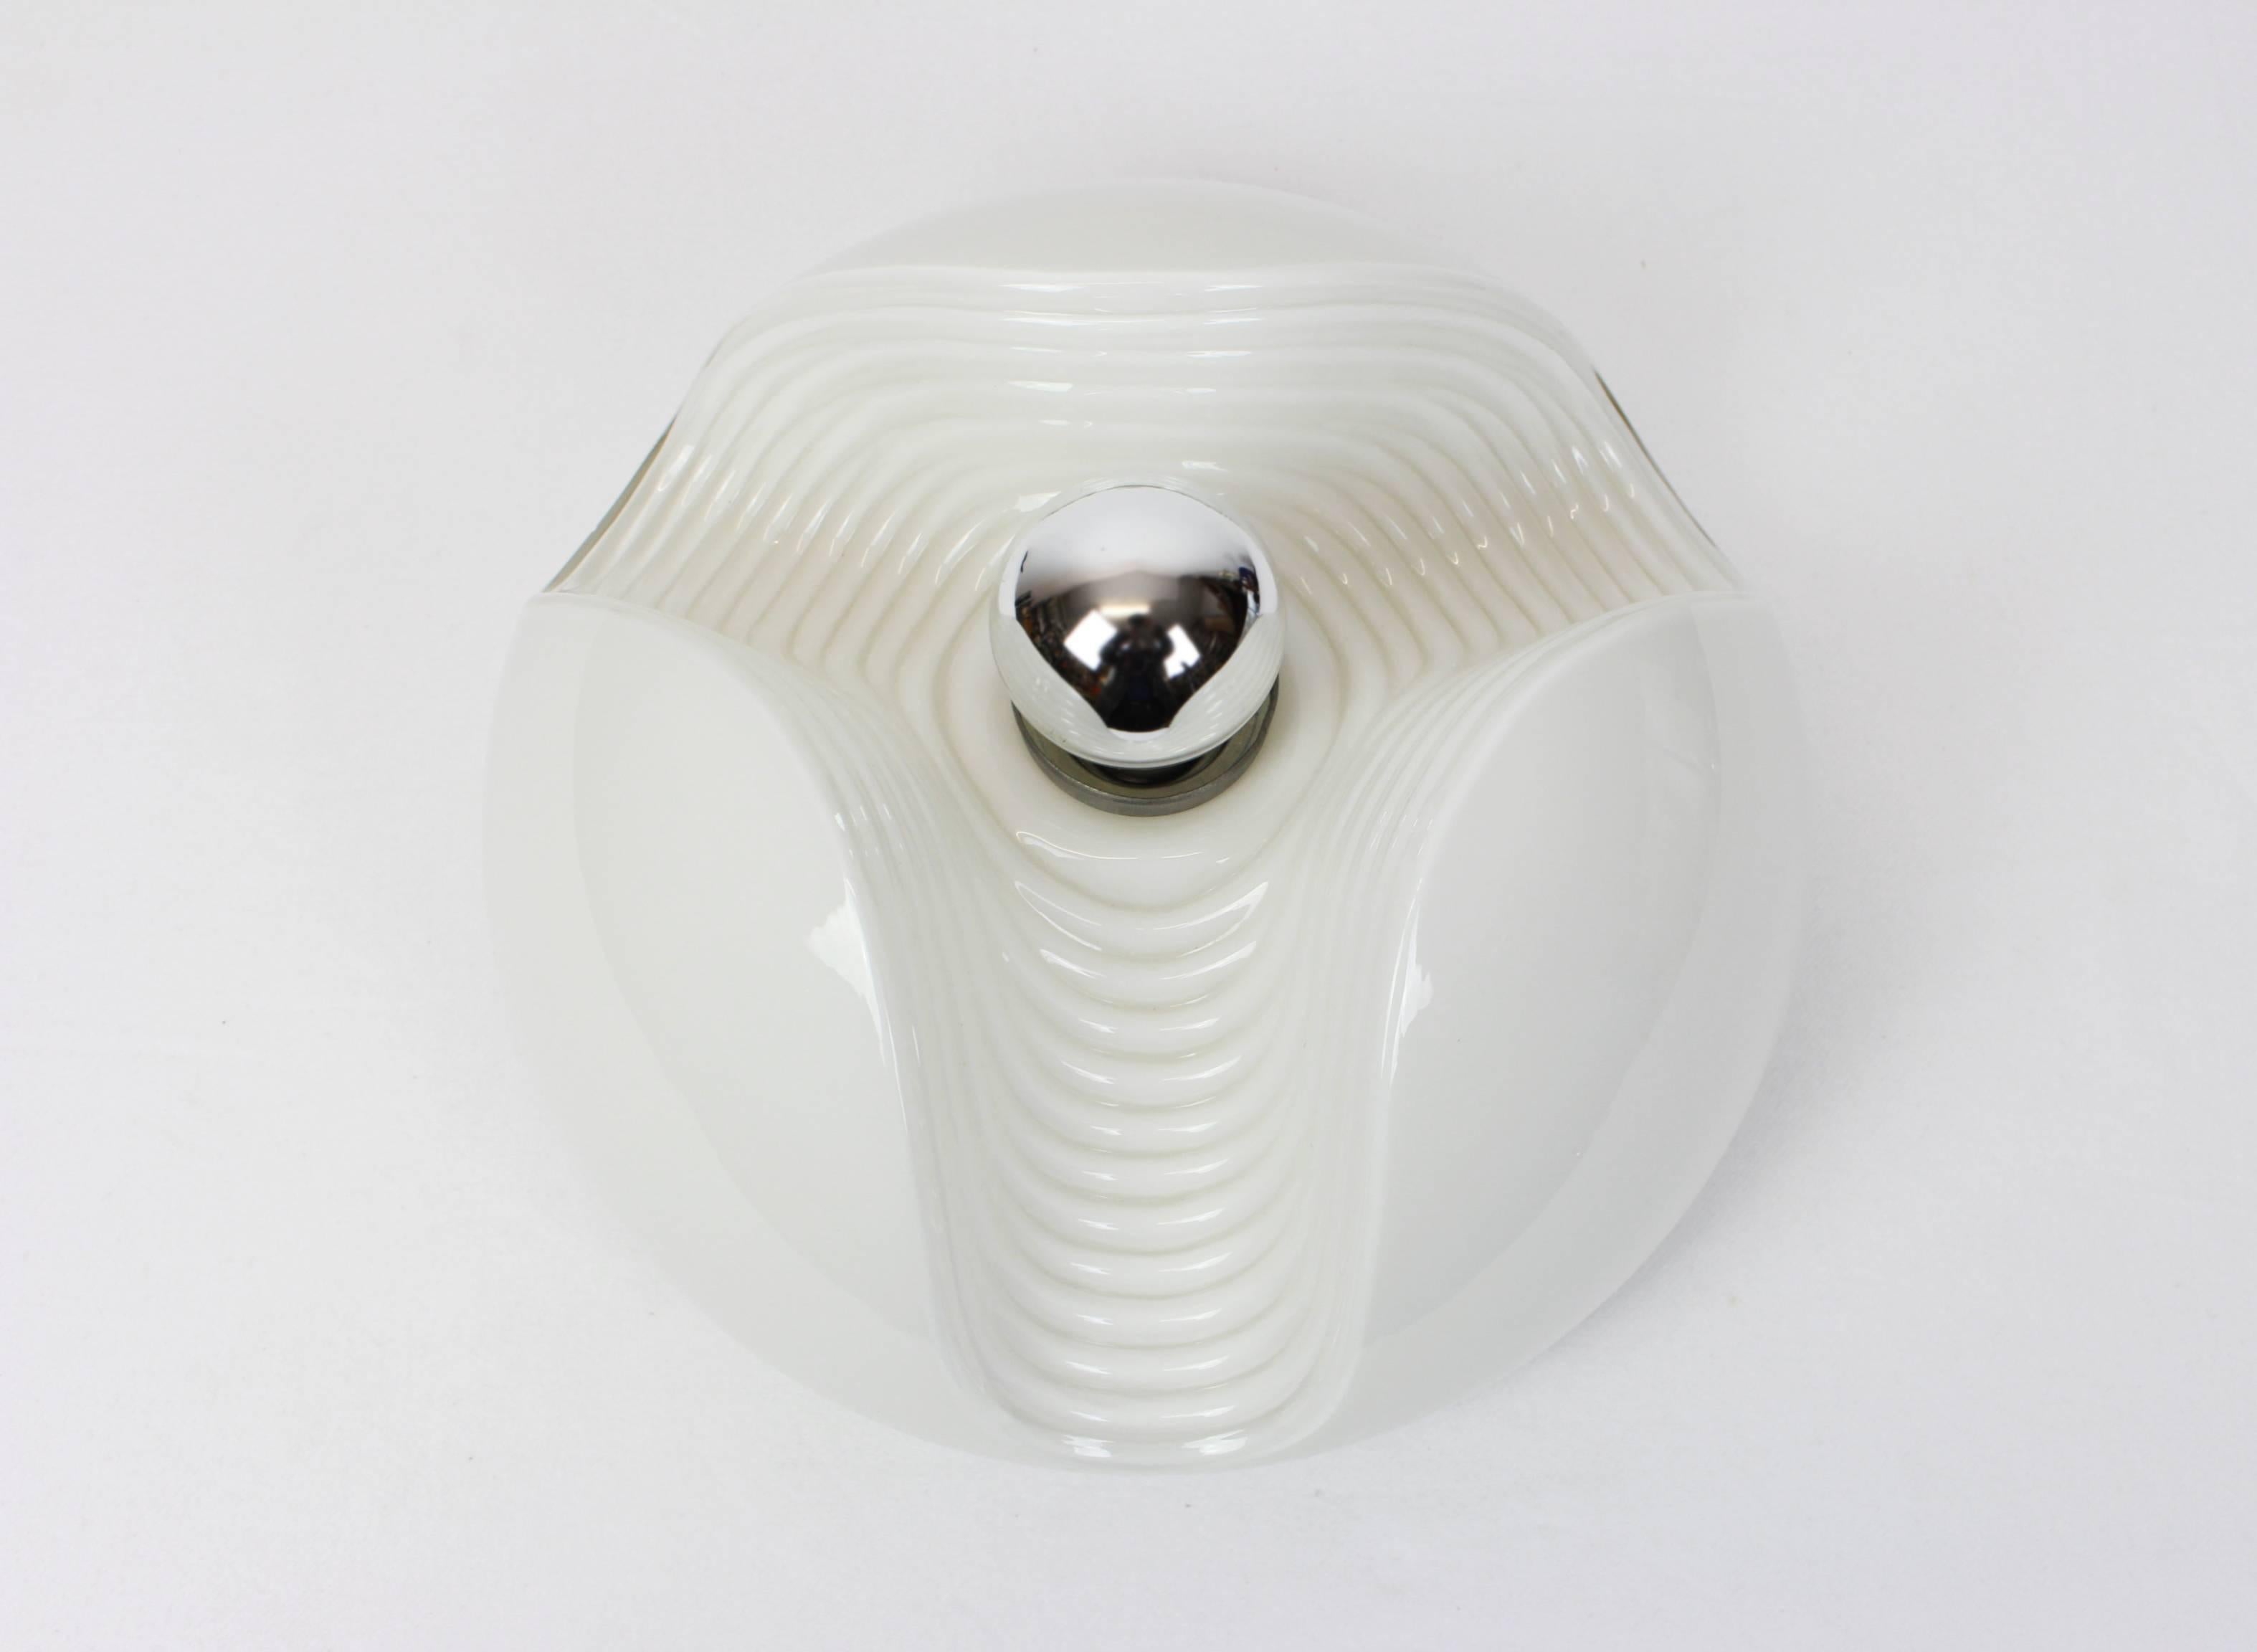 A special round biomorphic white glass wall sconce or flush mount designed by Koch & Lowy for Peill & Putzler, manufactured in Germany, circa the 1970s.

High quality and in very good condition. Cleaned, well-wired and ready to use. 

The fixture